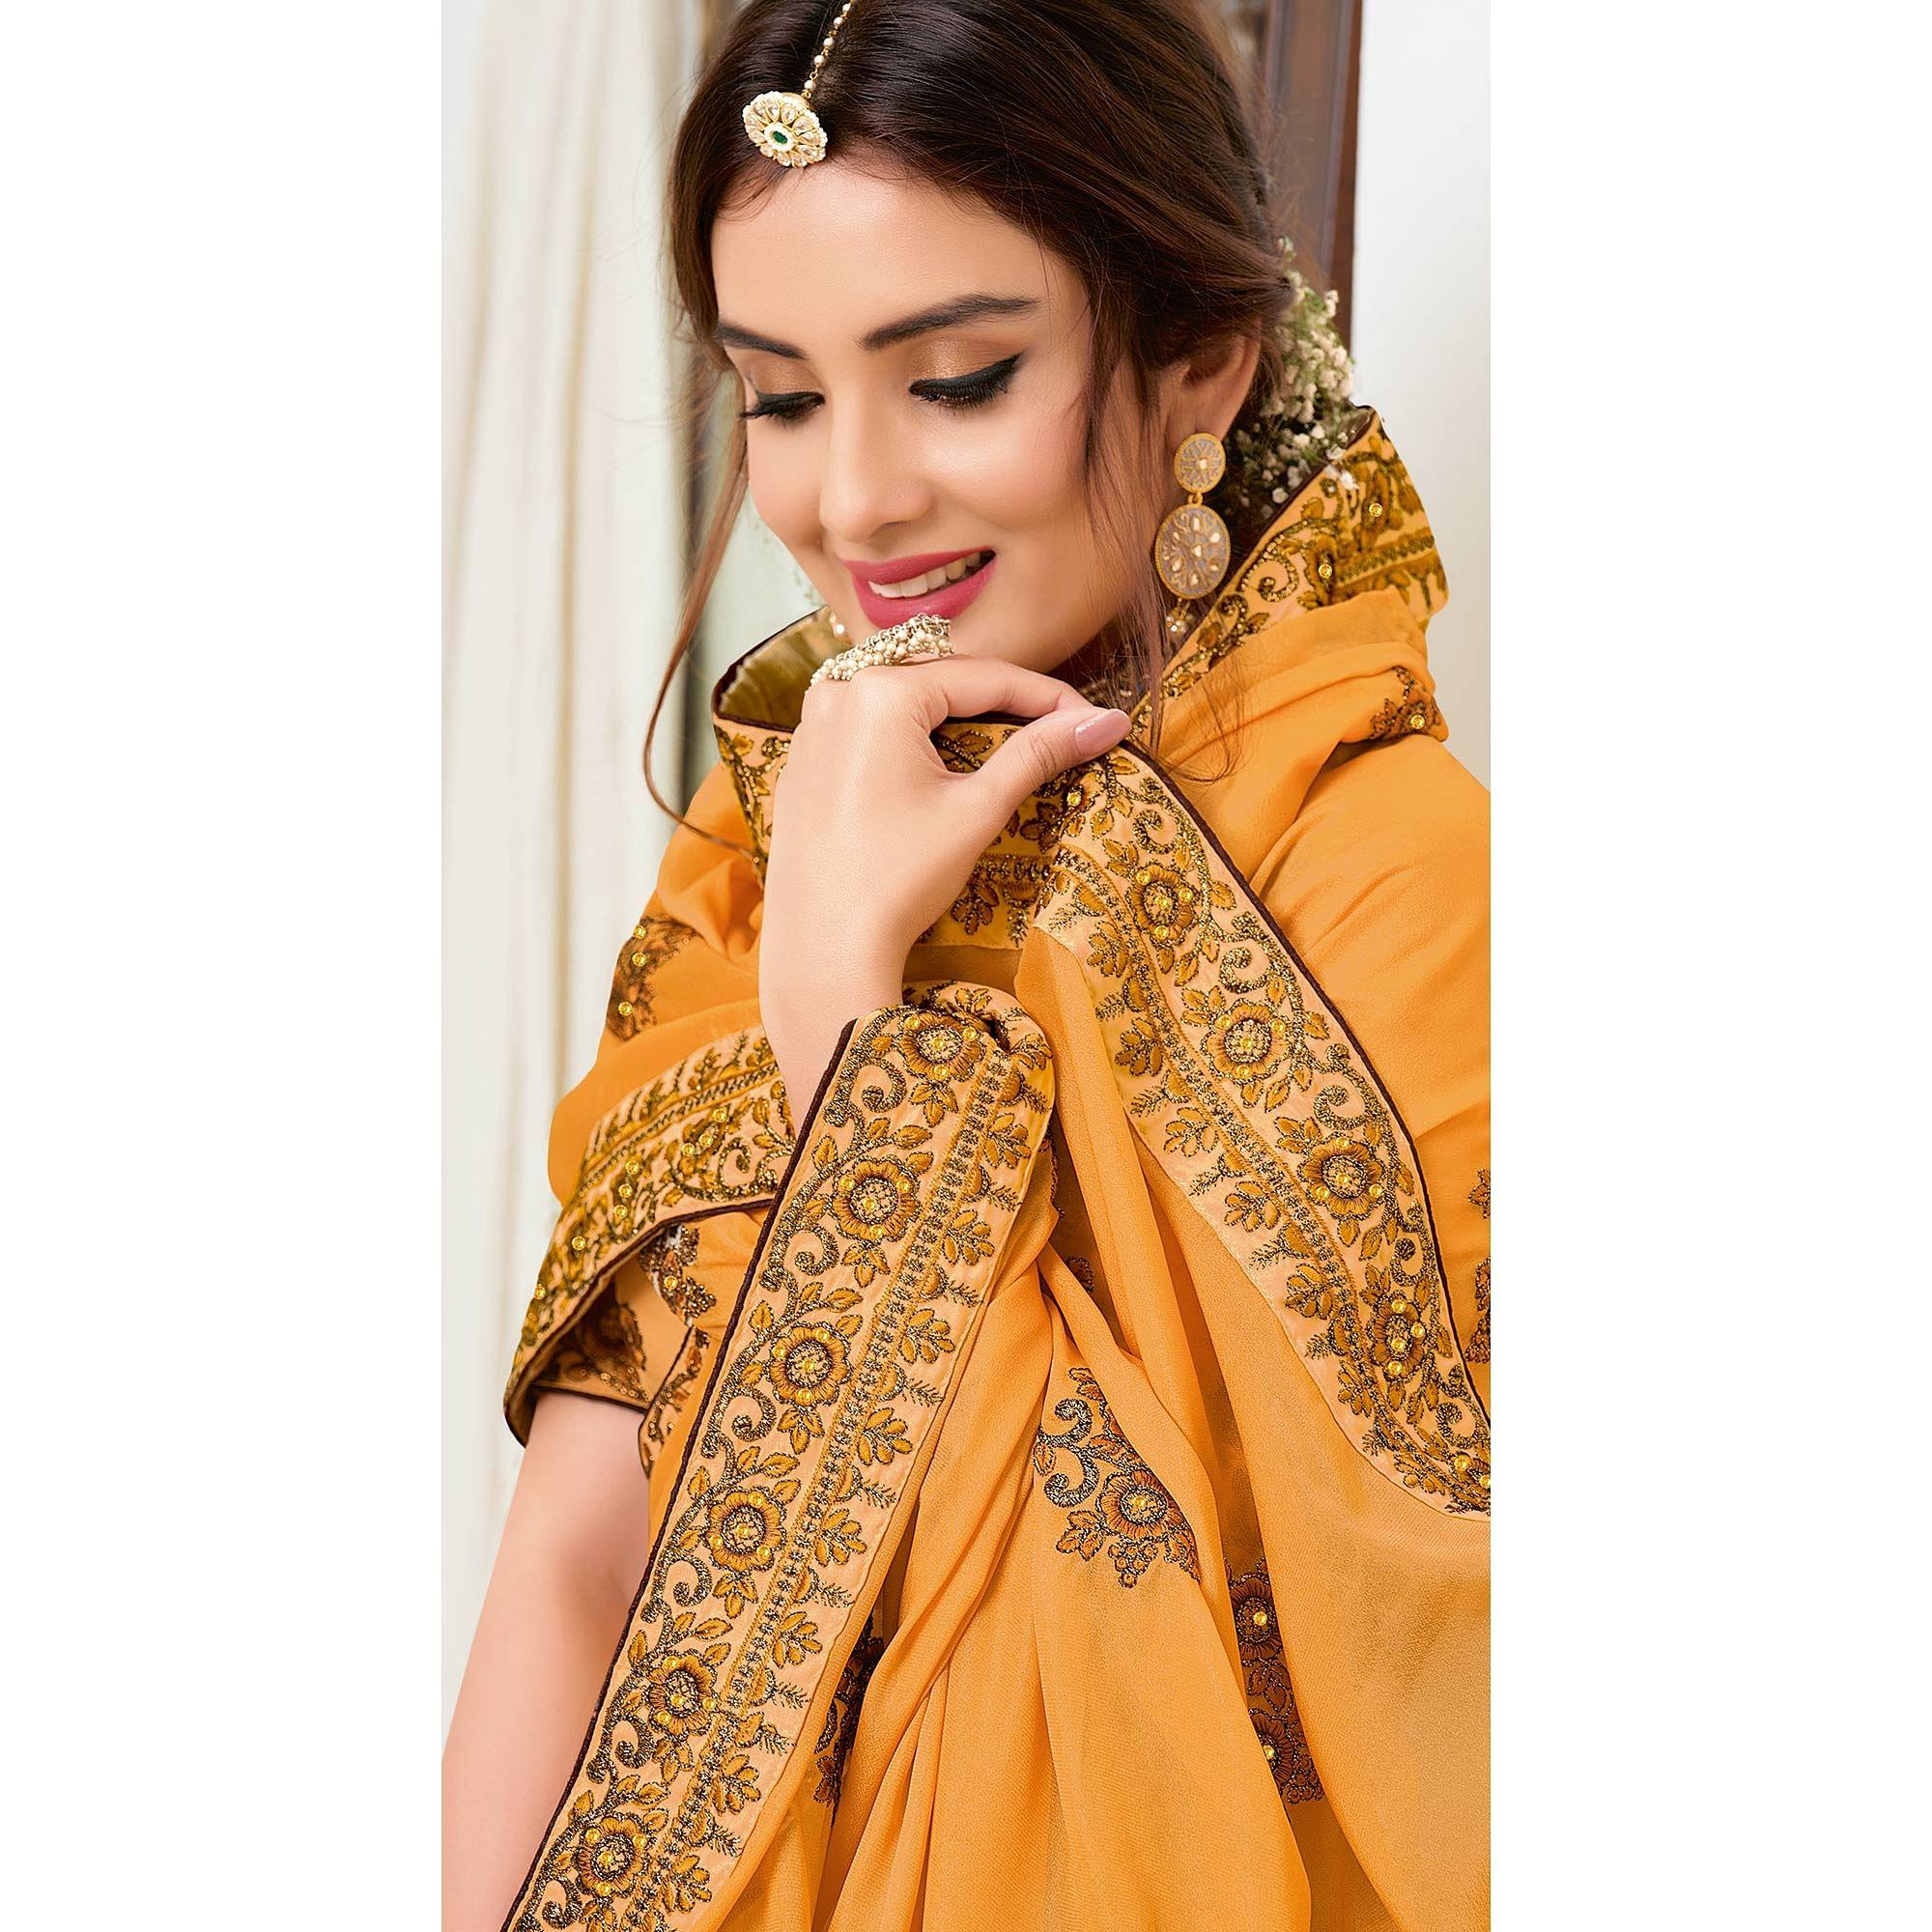 Groovy Mustard Yellow Colored Partywear Embroidered Crepe Georgette Saree - Peachmode